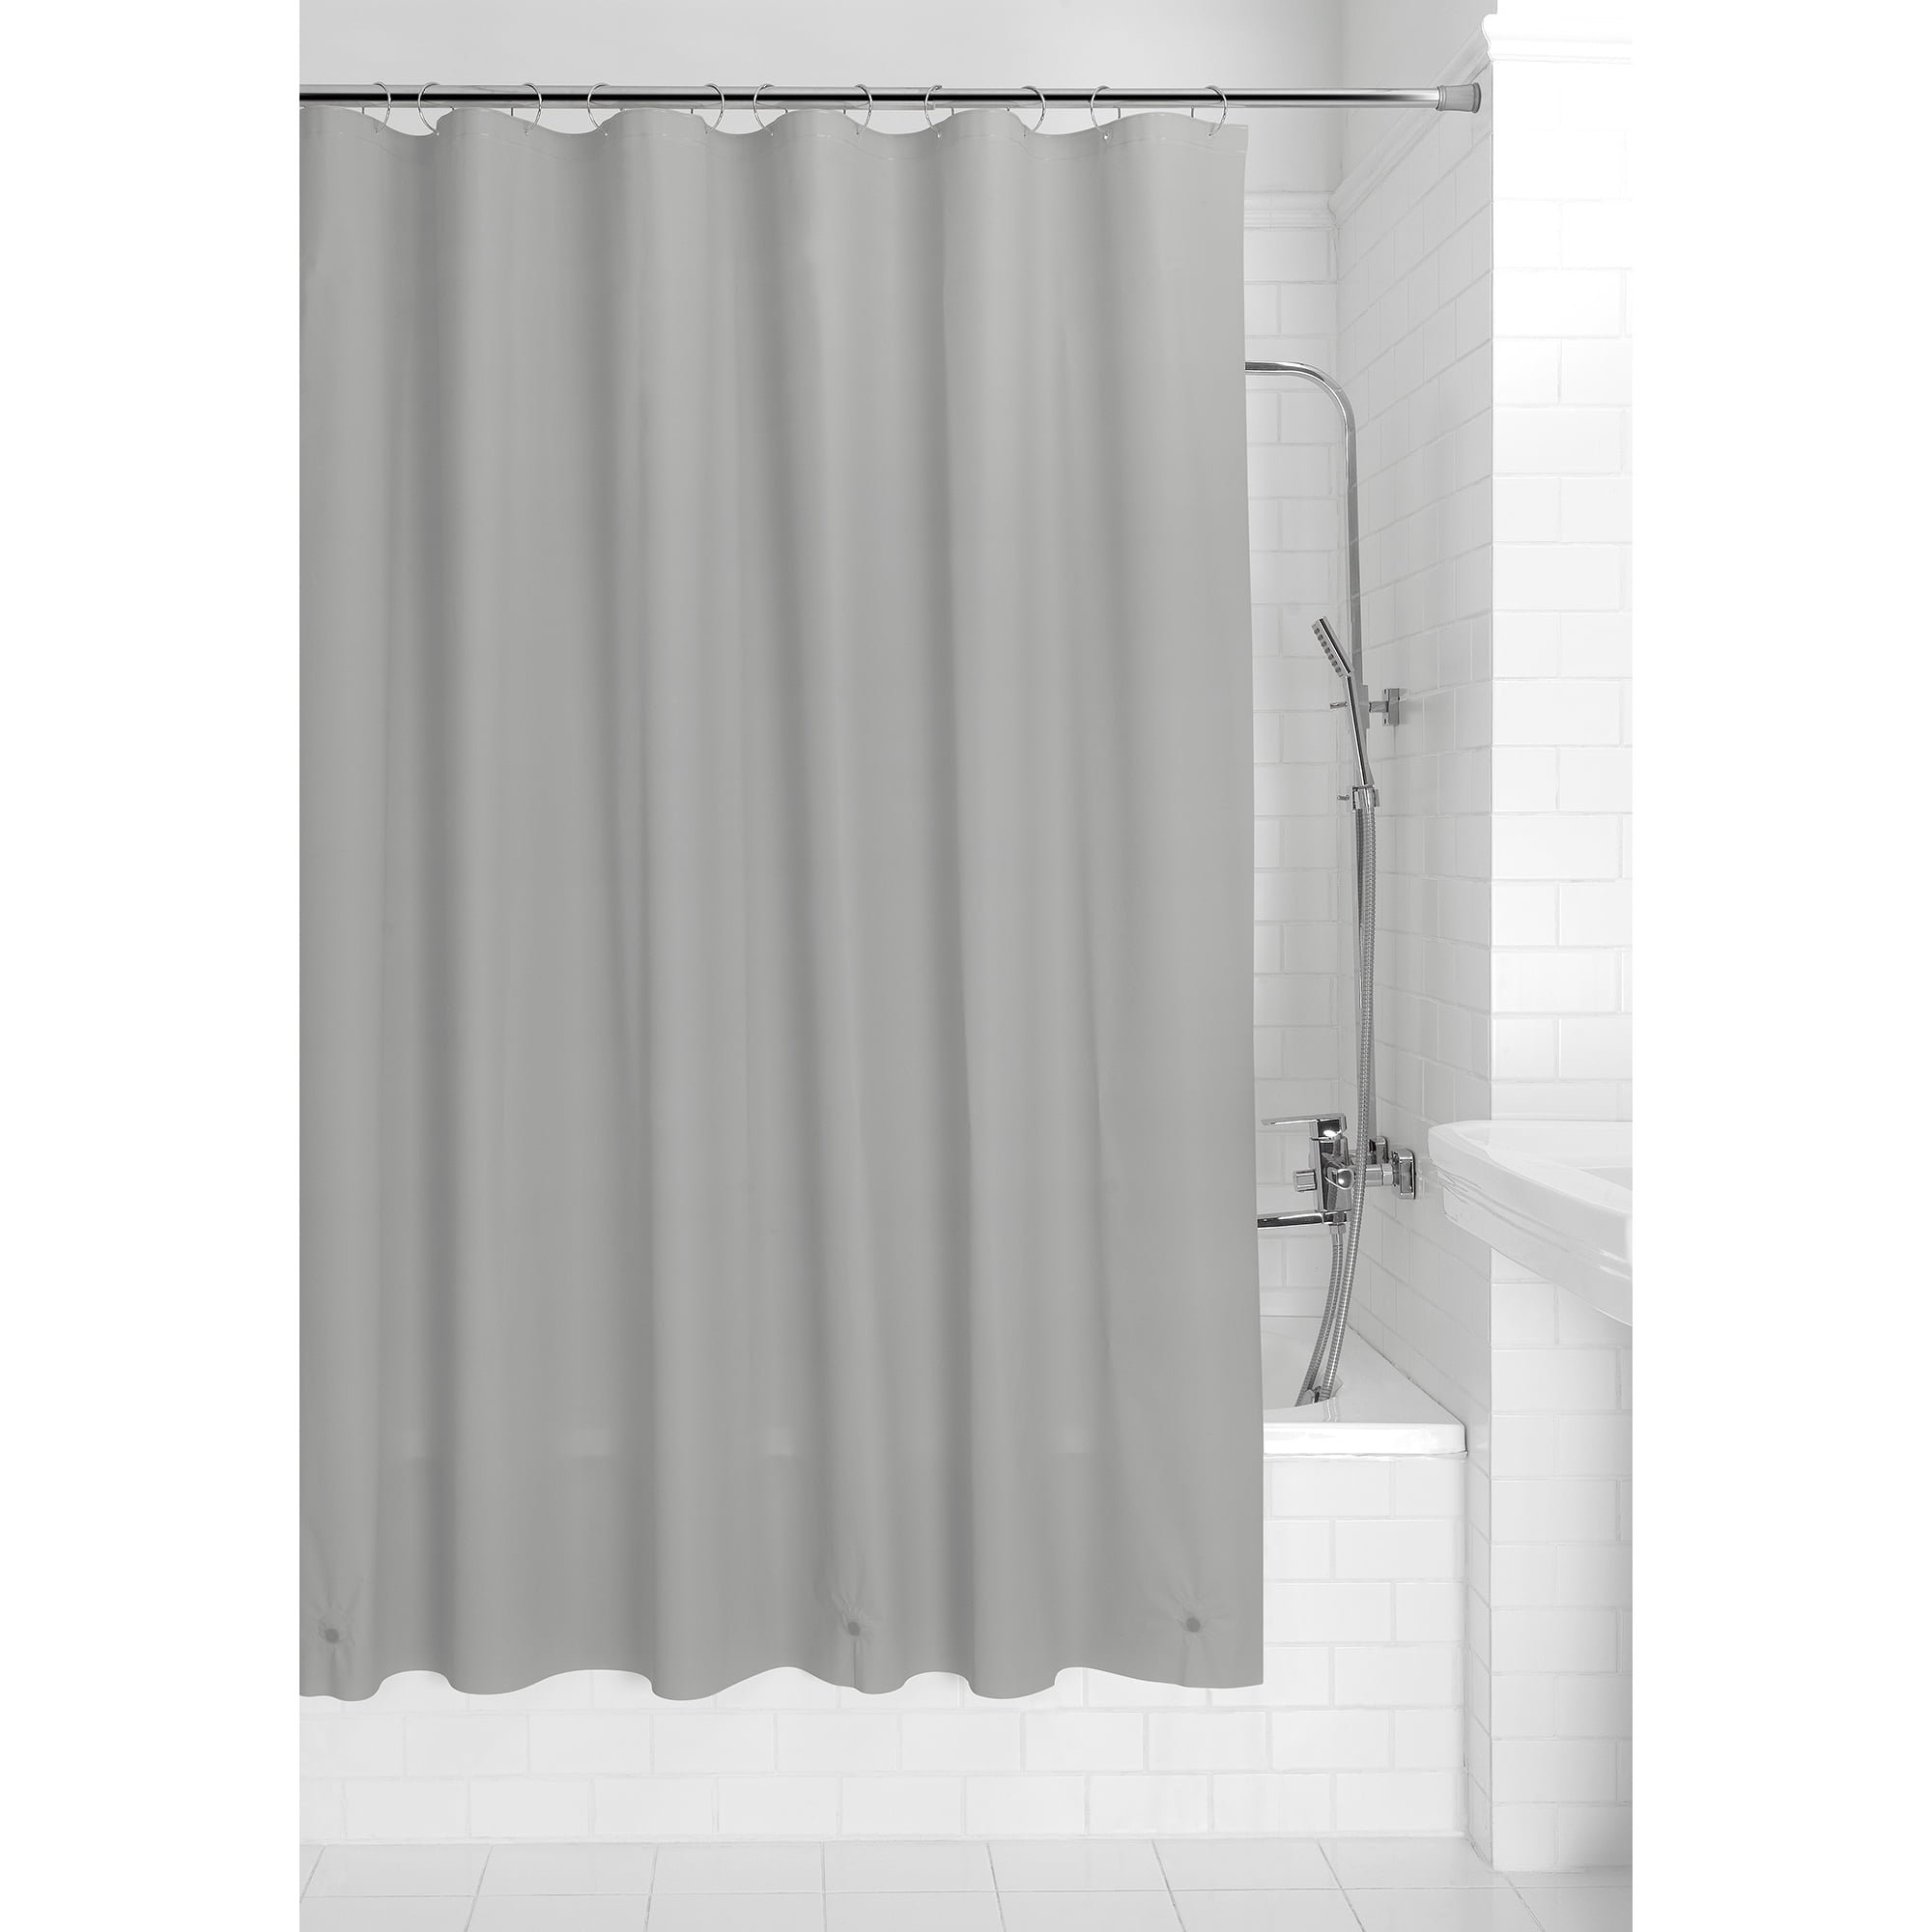 Mainstays Basic Light Weight Thickness PEVA Solid Shower Curtain Liner, Weighted Magnetized Hem, Light Grey, 70" x 71"